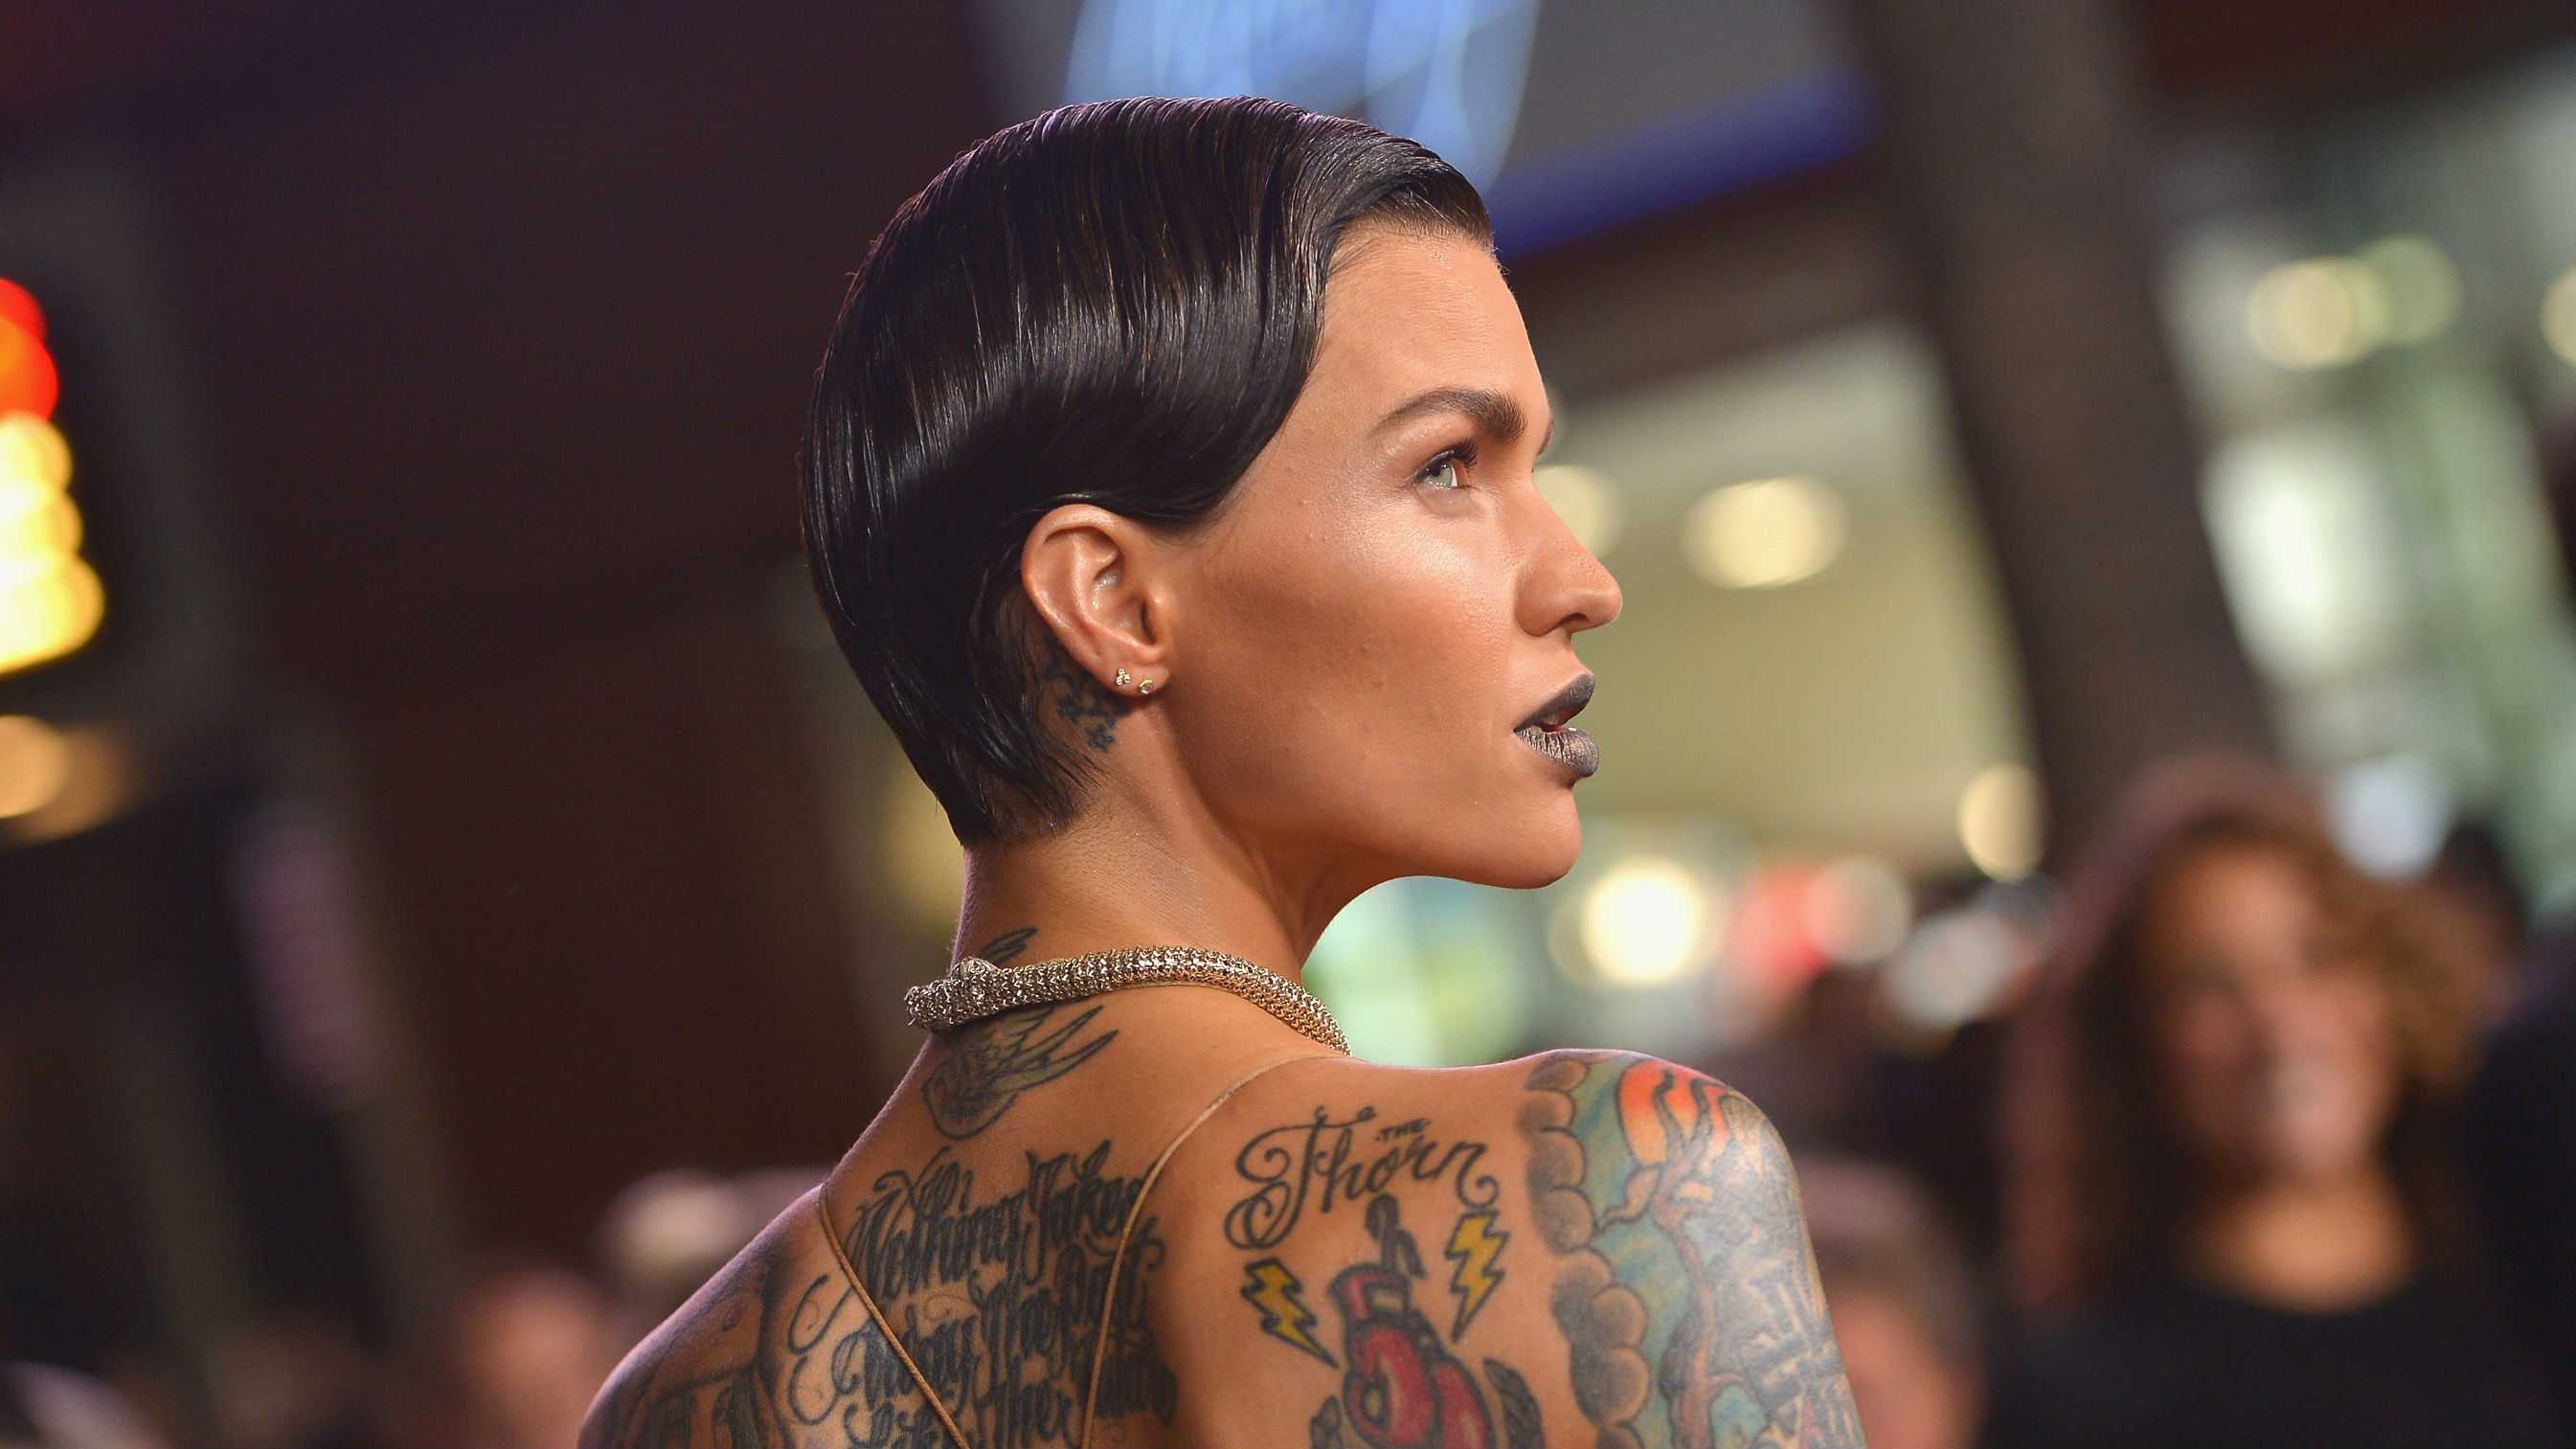 70+ Hot Pictures Of Ruby Rose – Batgirl In Arrowverse And Orange Is The New Black Star. 89